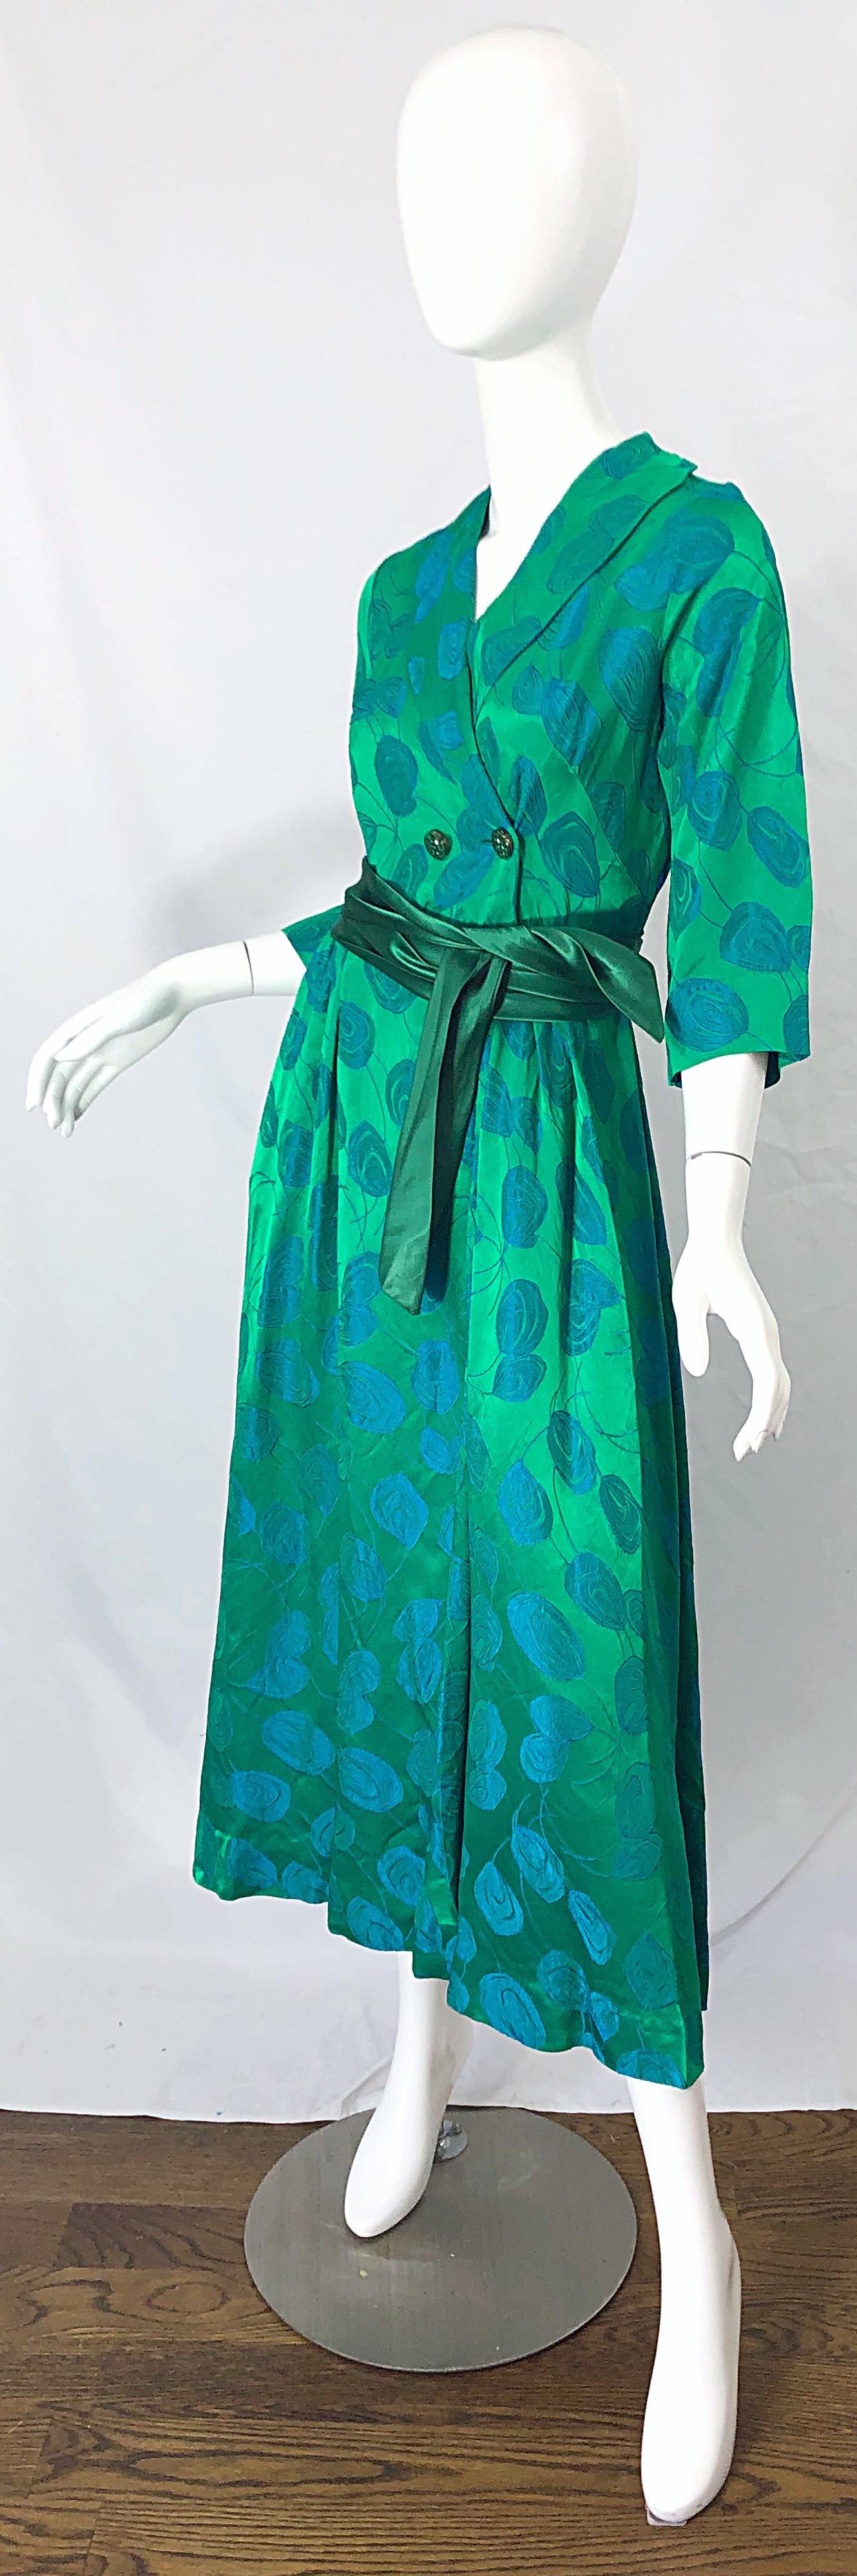 1950s Kelly Green + Blue Flower Print Rayon Rhinestone Vintage 50s Wrap Dress In Excellent Condition For Sale In San Diego, CA